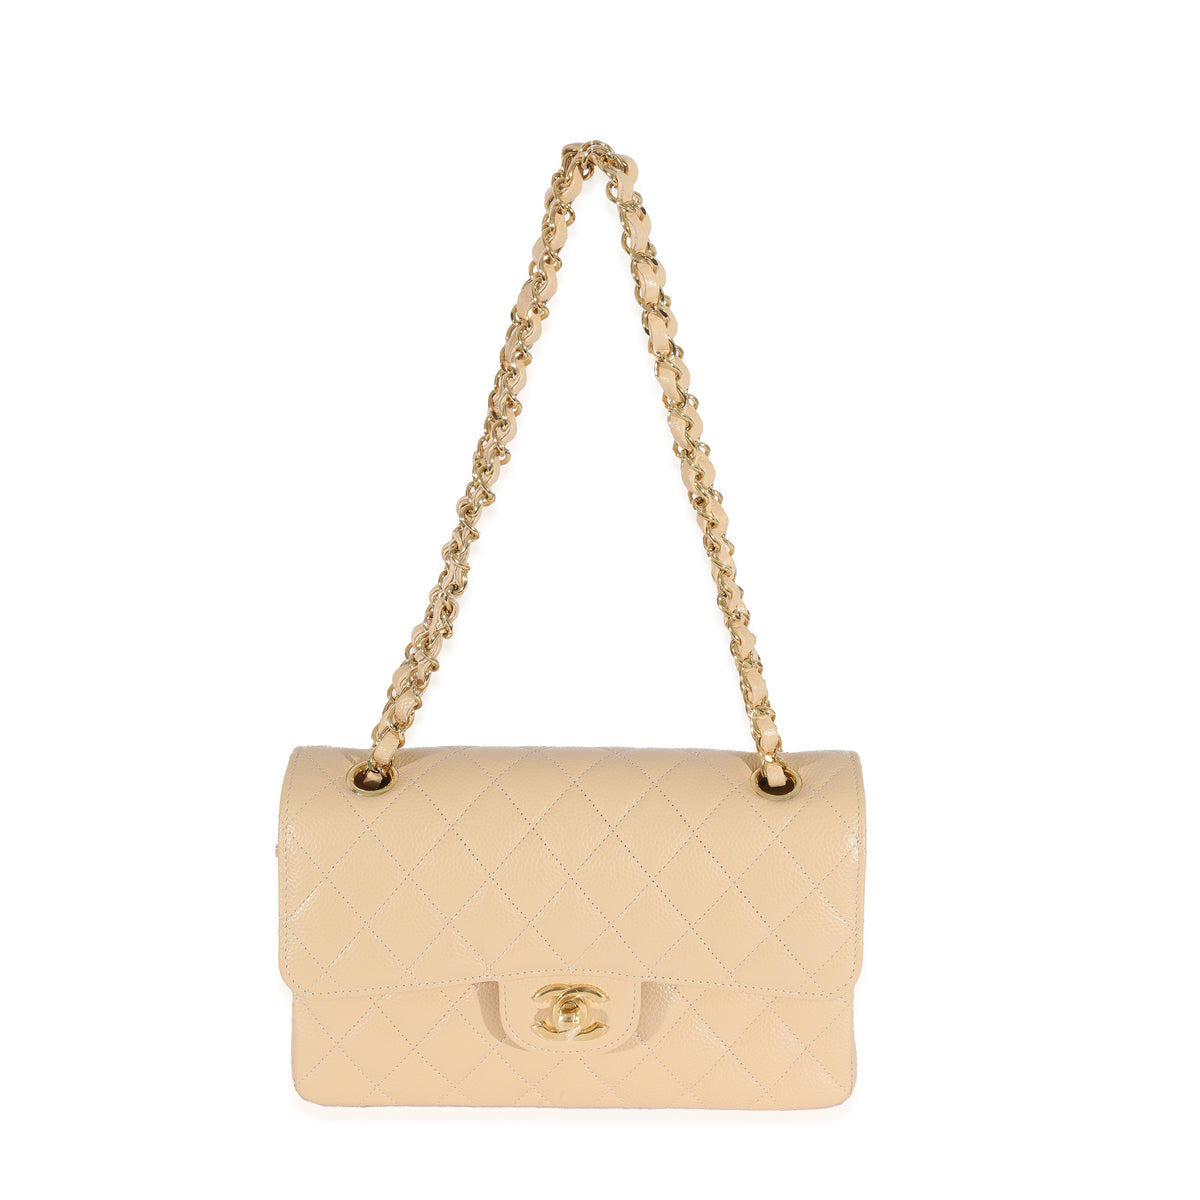 Chanel Beige Caviar Small Classic Double Flap